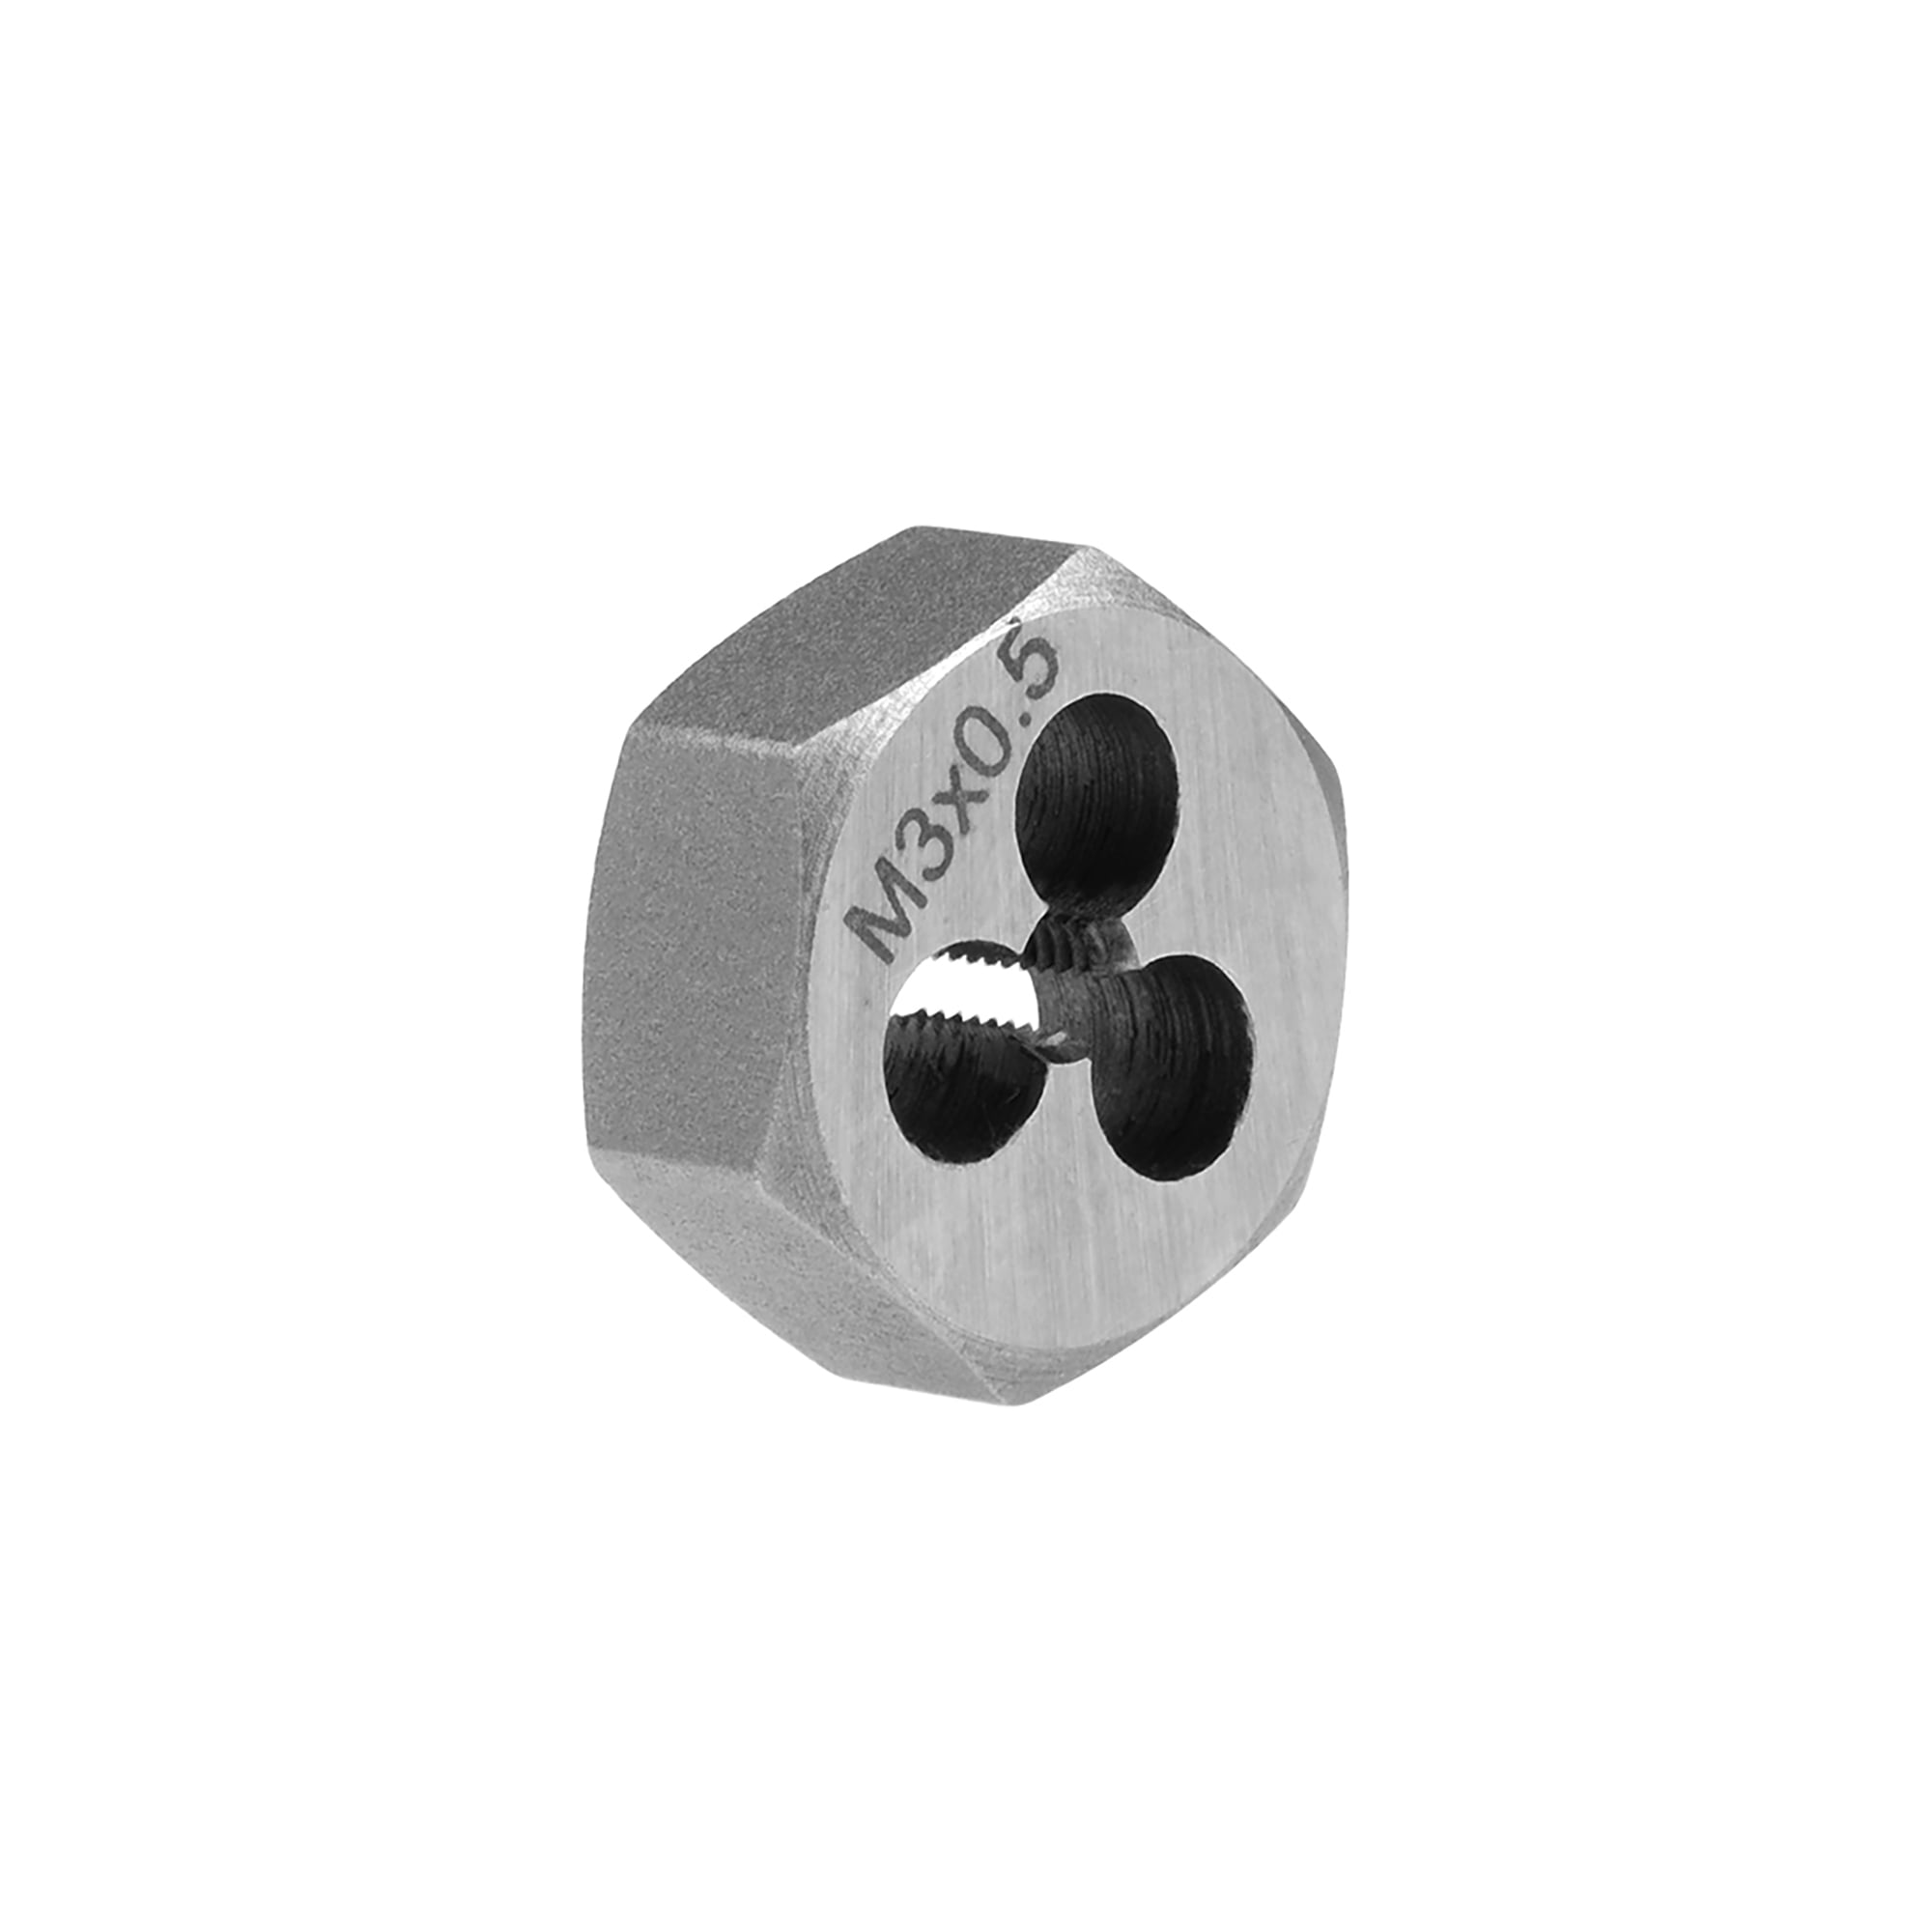 Details about   M3x0.5mm Carbon Steel Metric Hexagon Taper Pipe Hex Rethreading Die 